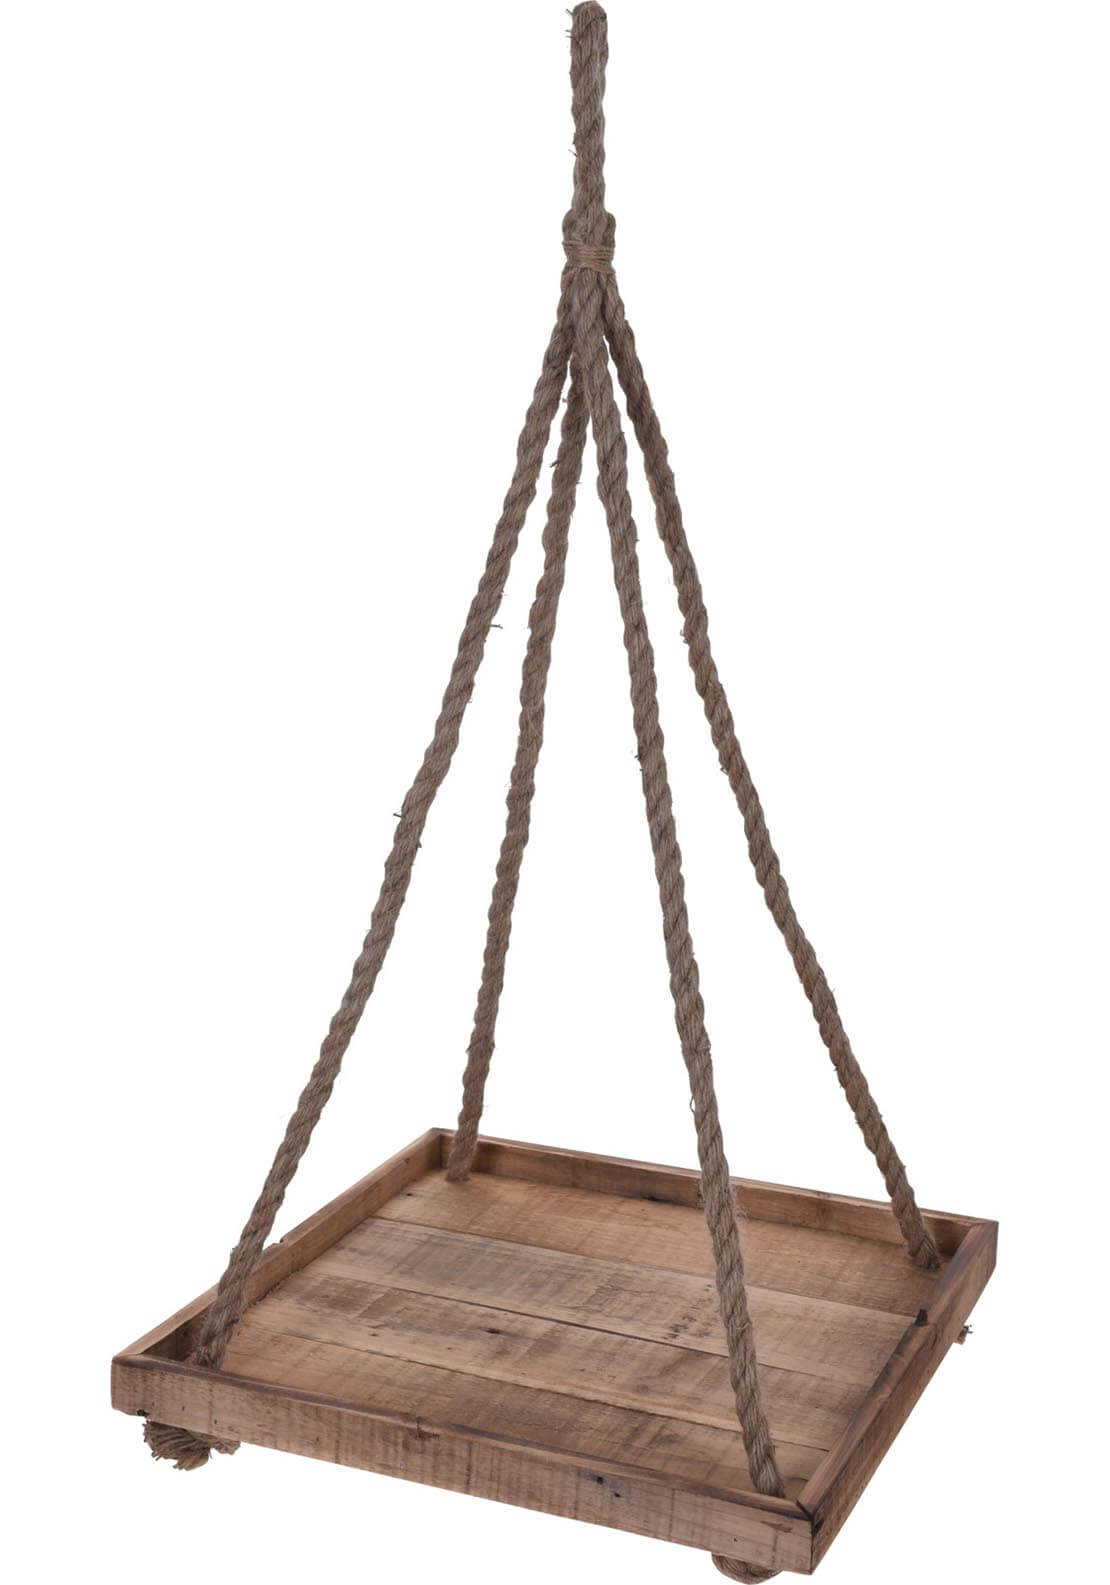 The Home Garden Hanging Tray On Rope 1 Shaws Department Stores